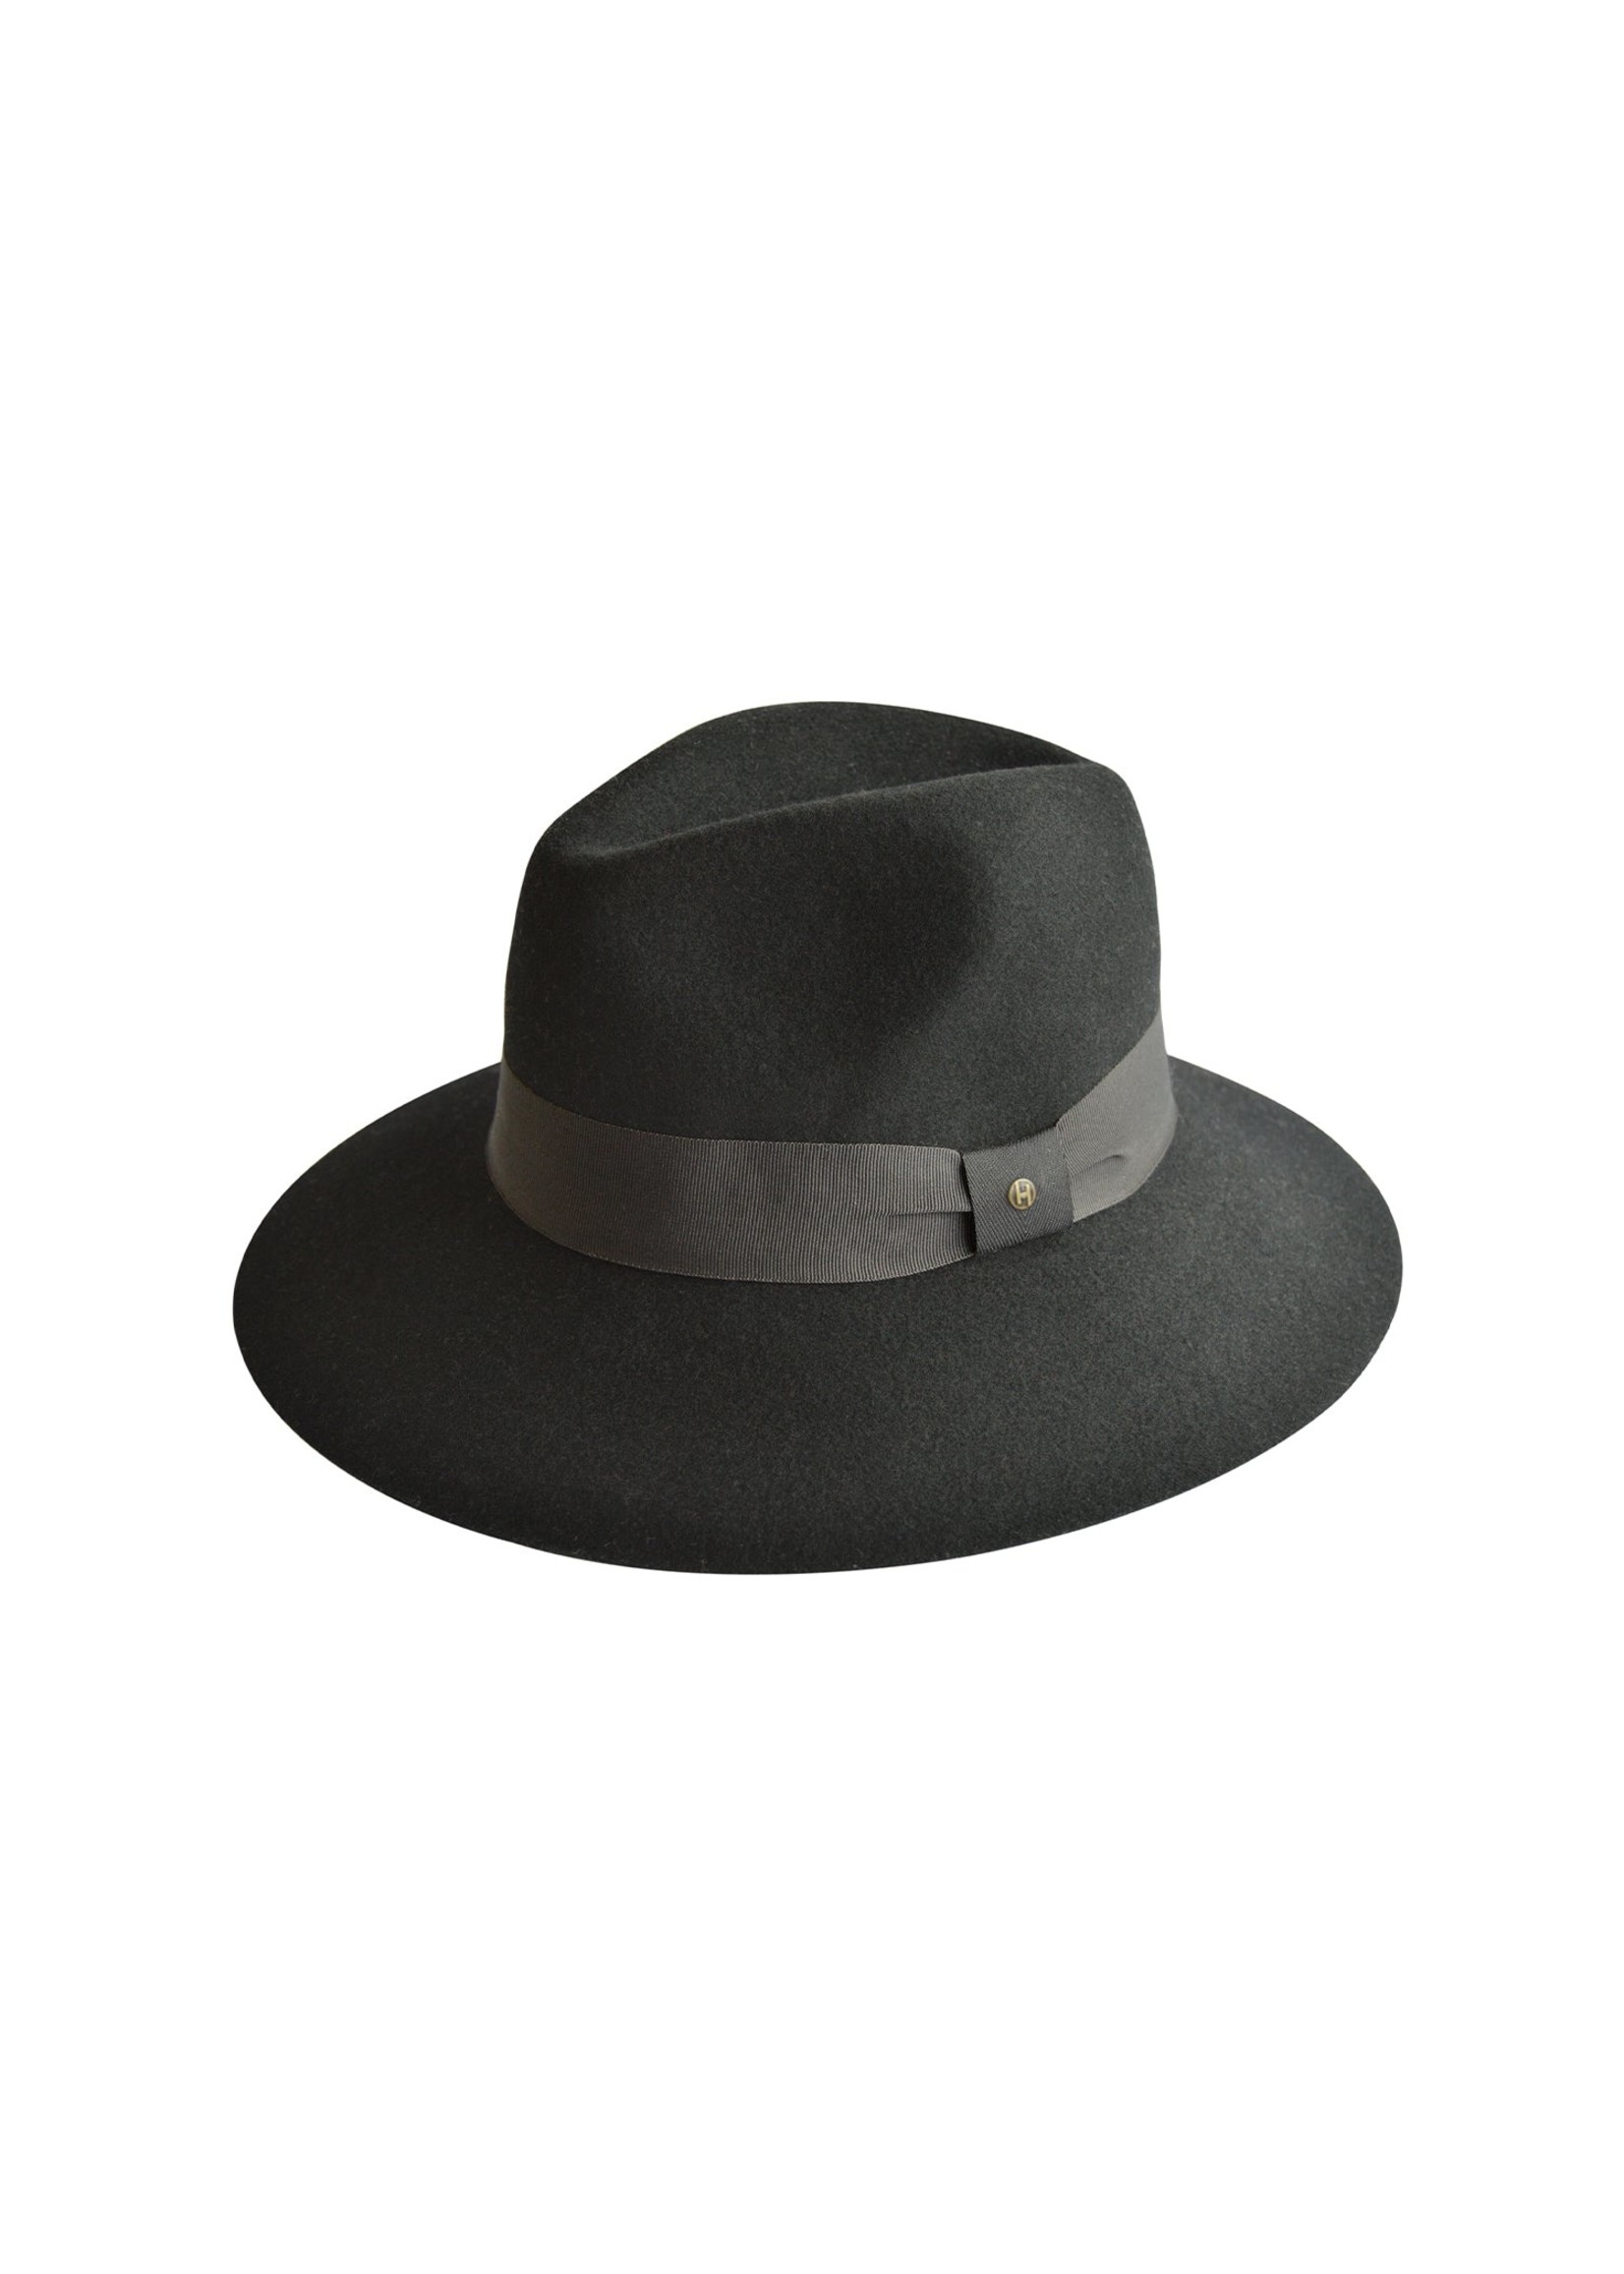 House of Ord - Cape Town Heather Fedora Noir Hoed